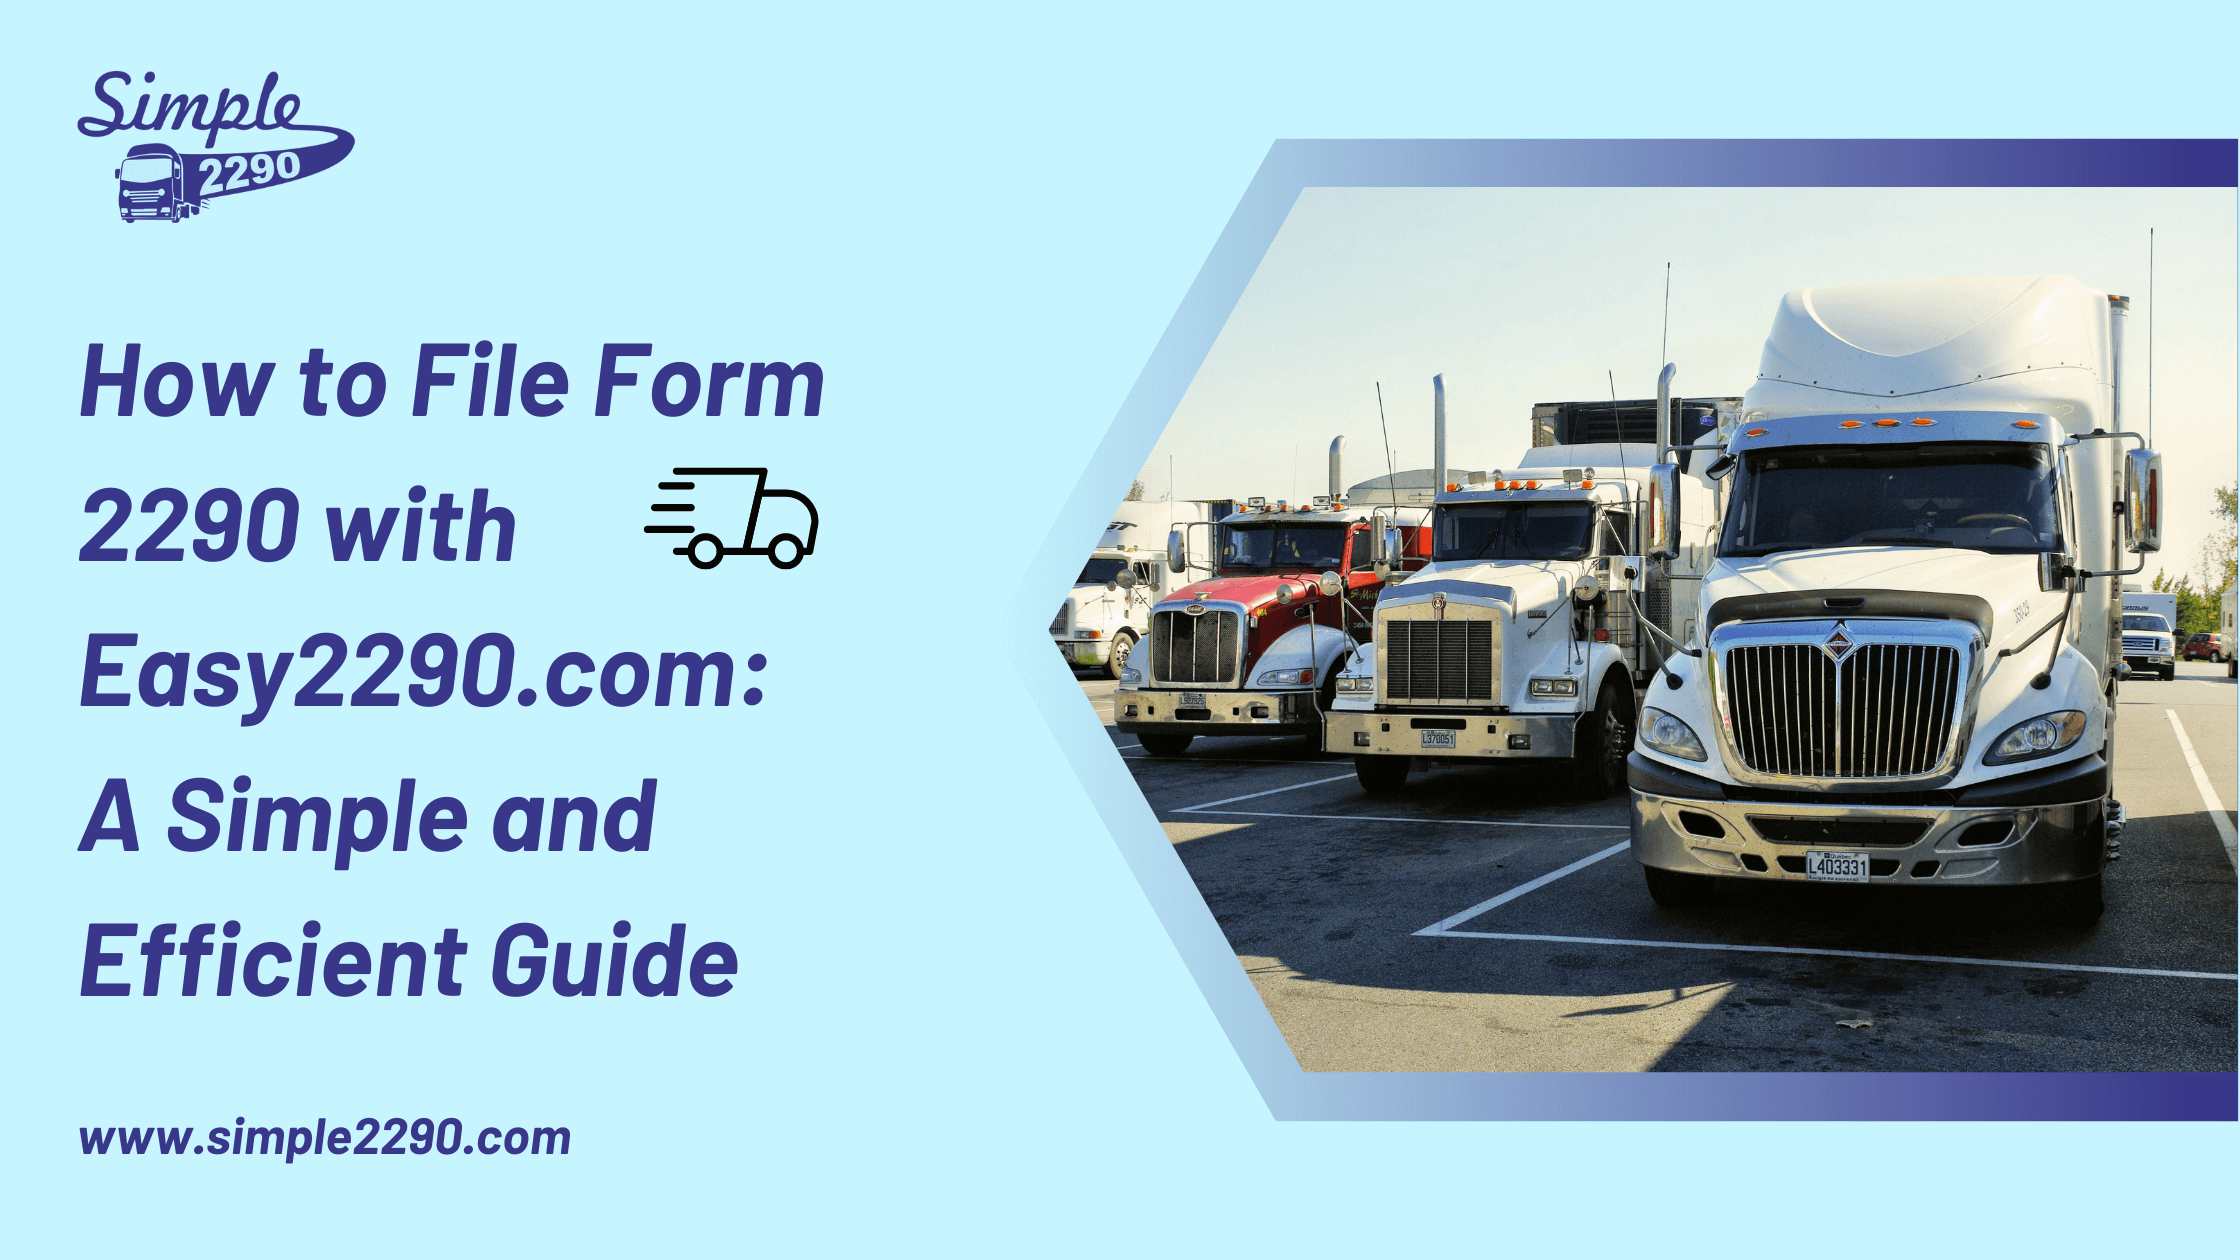 How to File Form 2290 with simple2290.com: A Simple and Efficient Guide